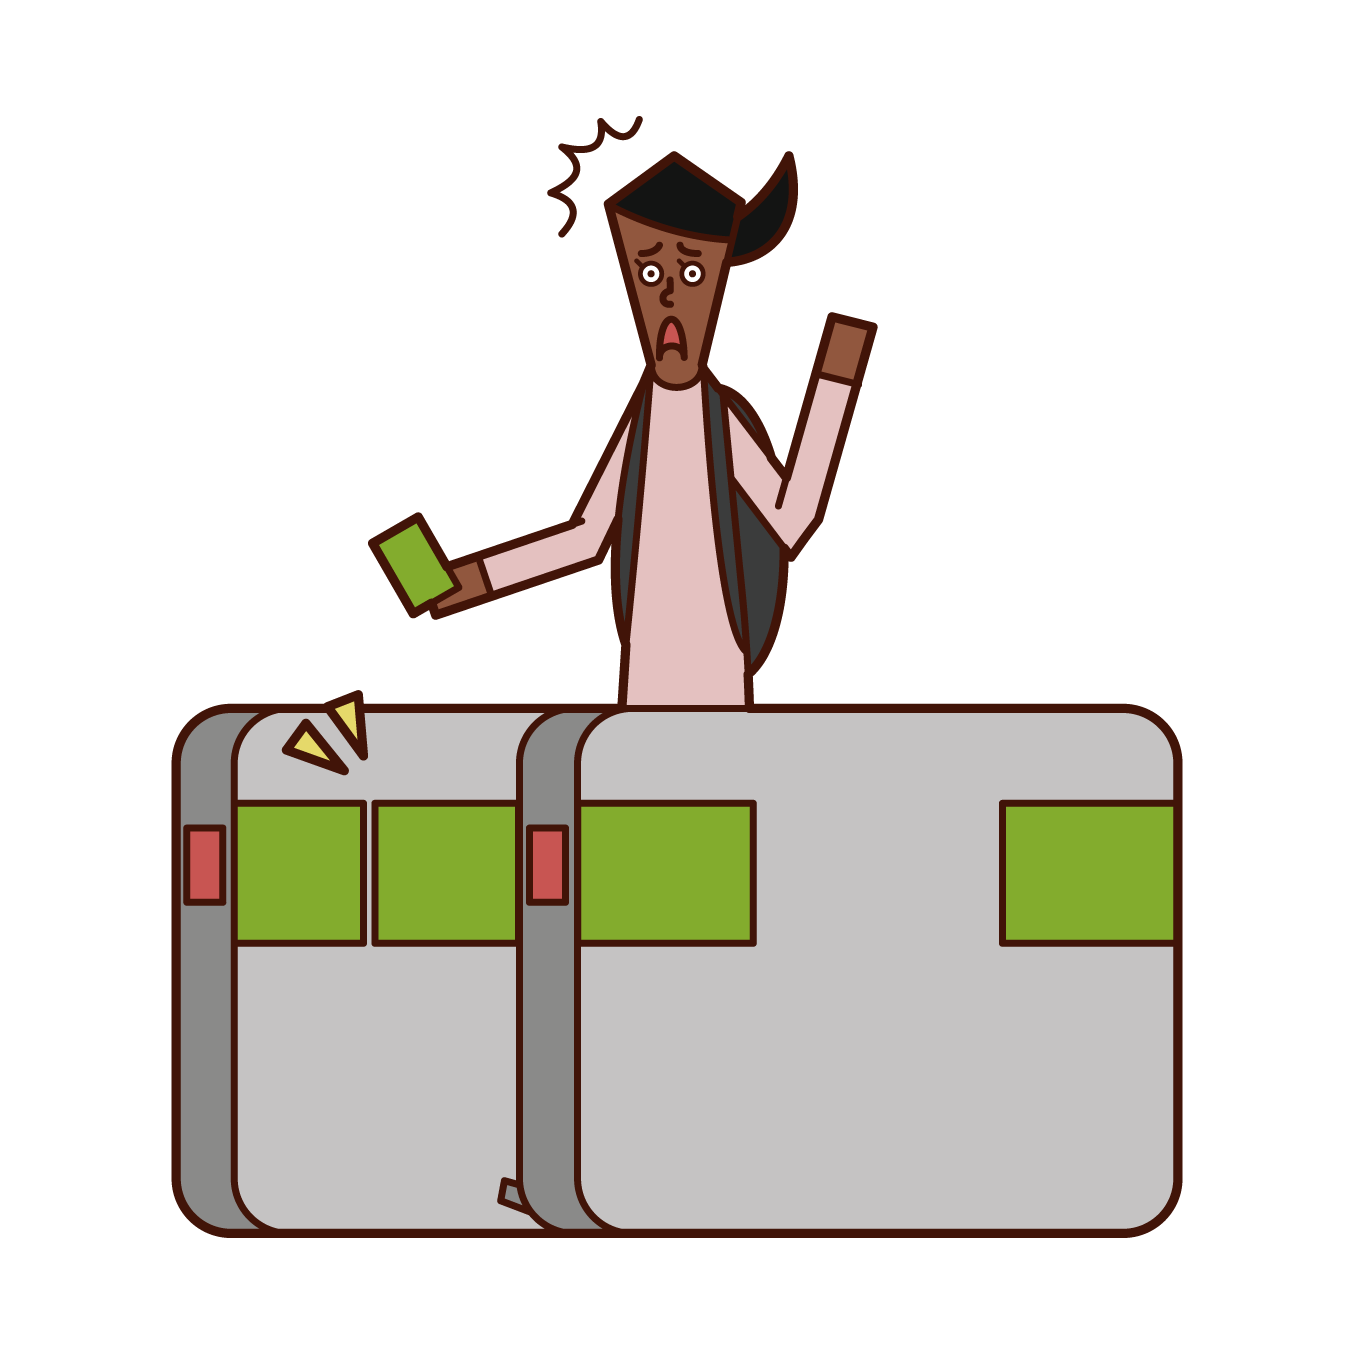 Illustration of a woman who couldn't pass through the ticket gate